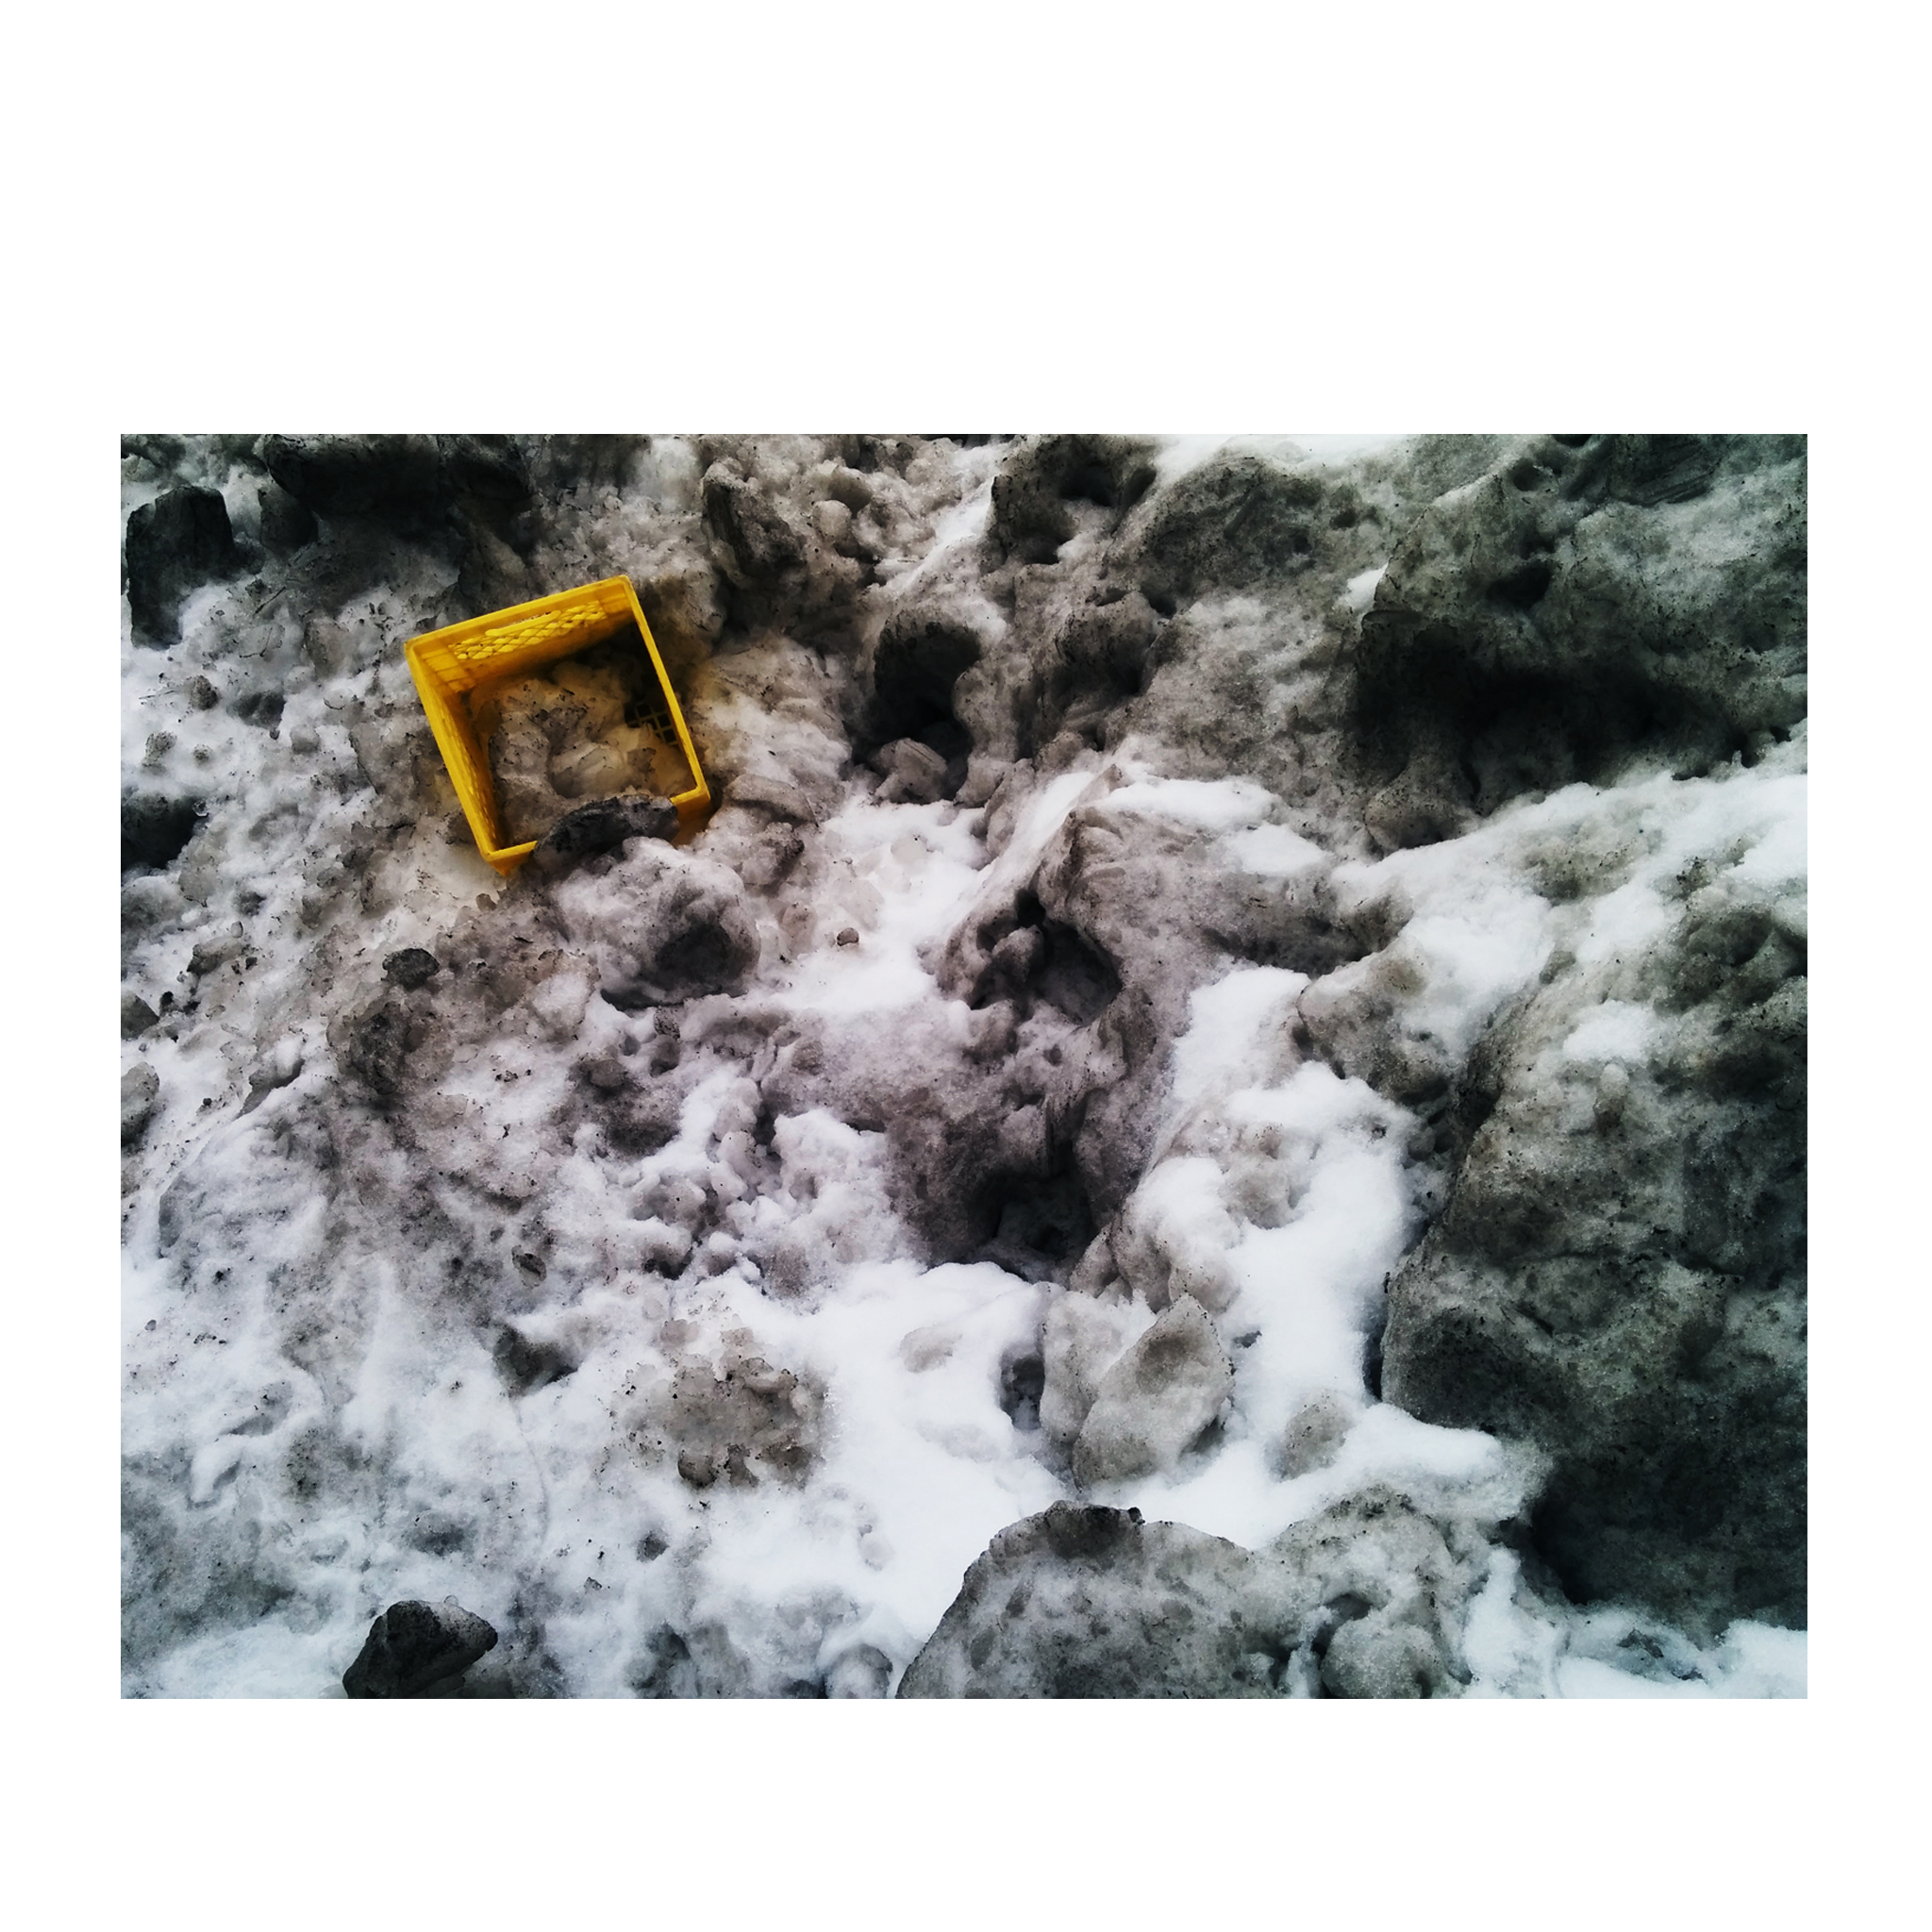 a yellow milk crate in dark dirty snow bank